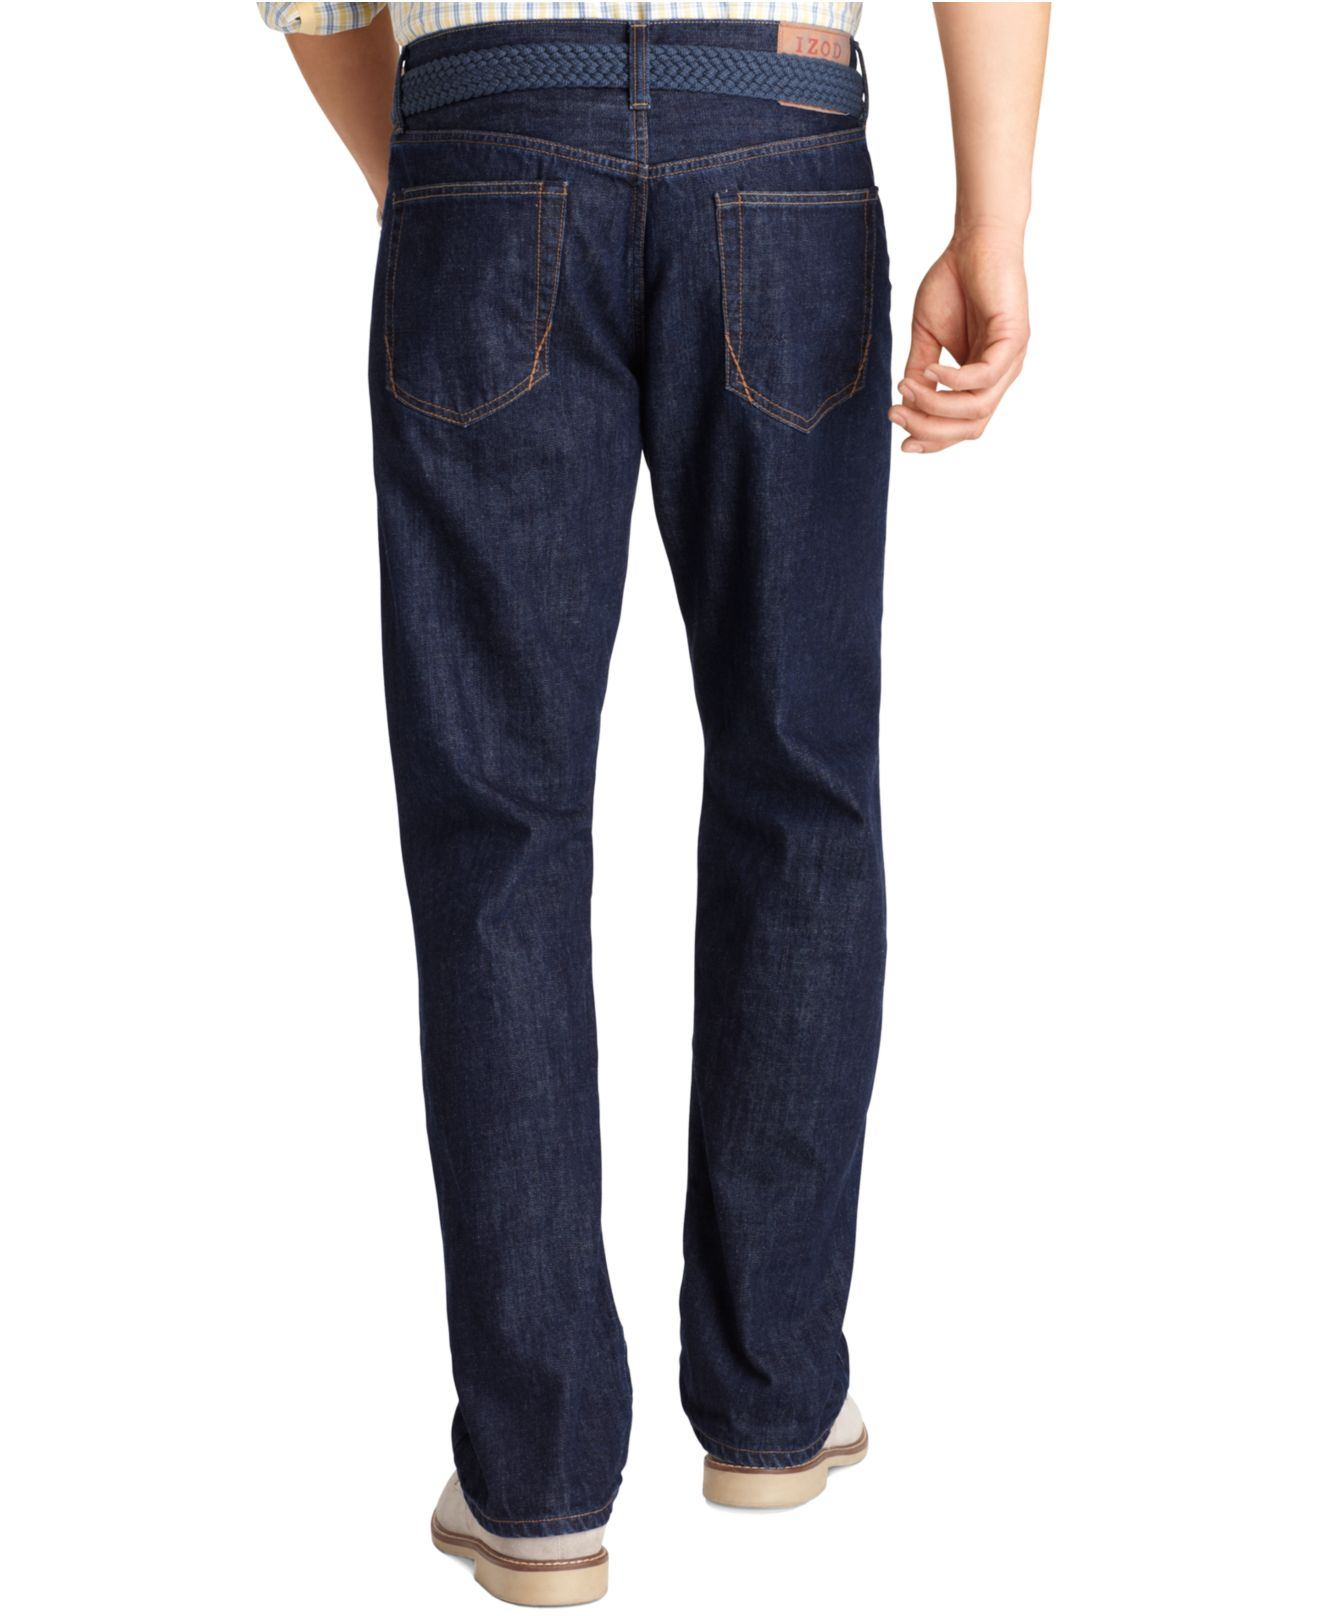 Lyst - Izod Big And Tall Jeans, Relaxed-Fit Rinse Used Jeans in Blue ...